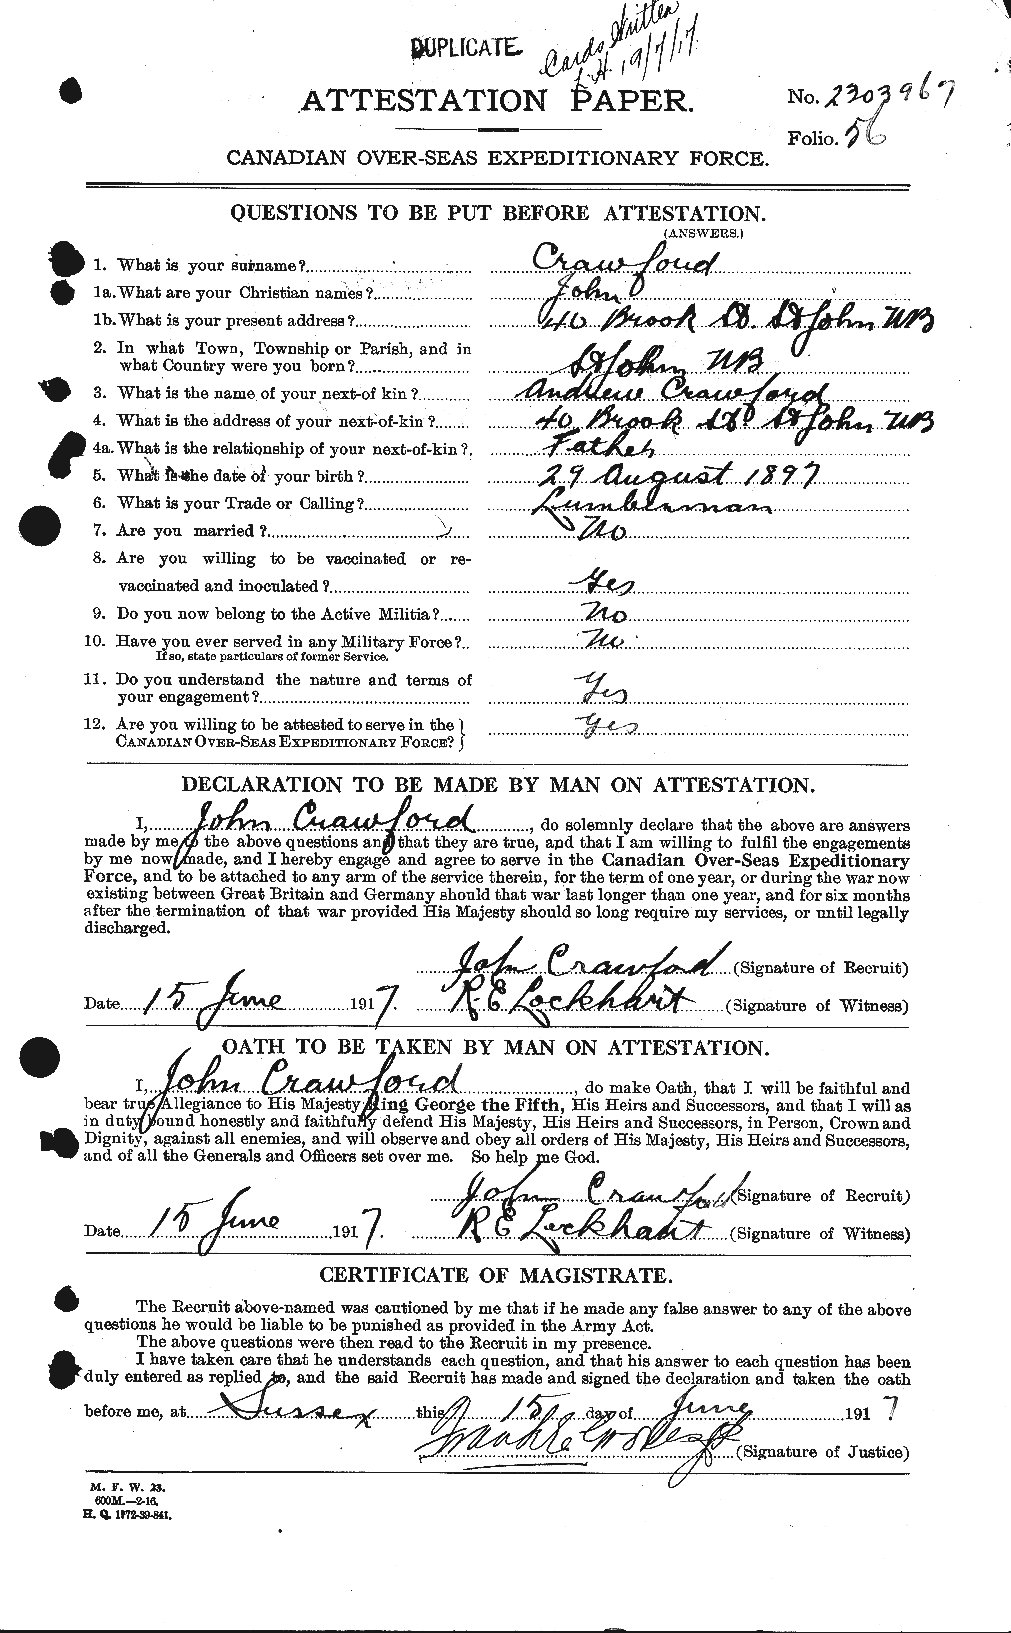 Personnel Records of the First World War - CEF 062454a